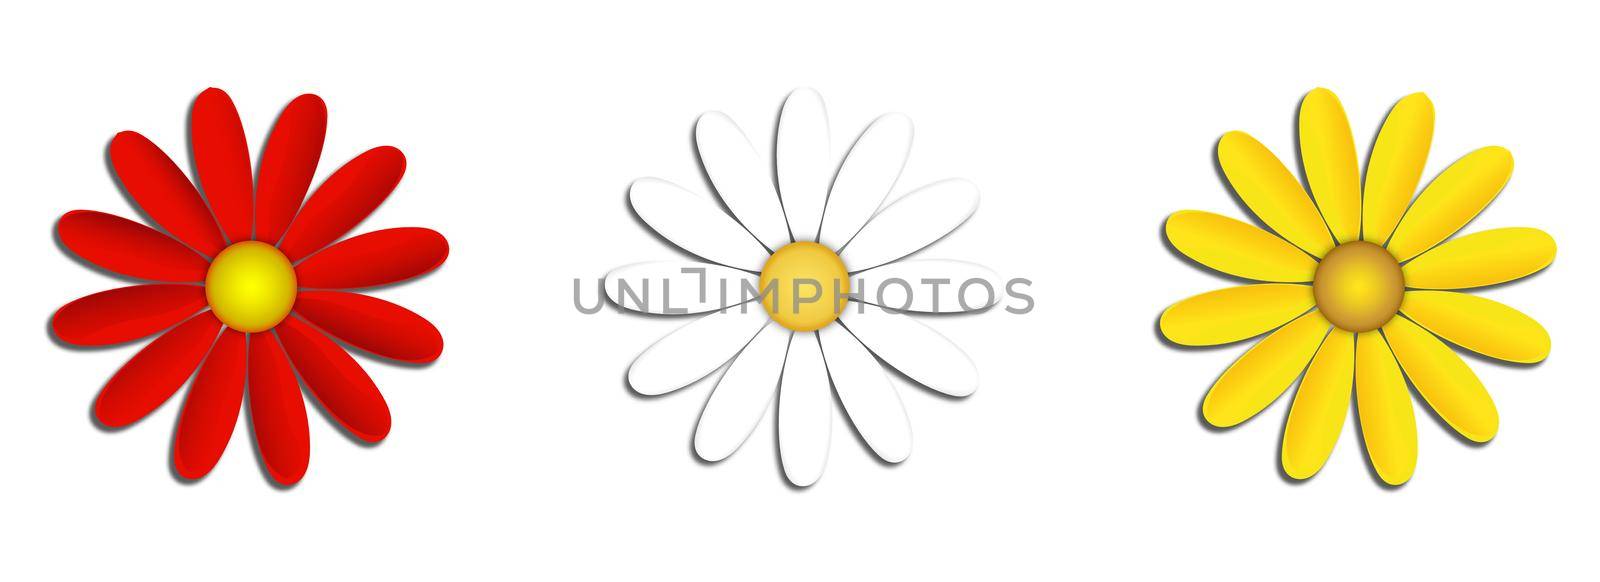 White, yellow and red chamomile flowers, gerberas on an isolated background. Clip art for floral fashion creative ideas. Stylish spring or summer nature background. Graphic design.